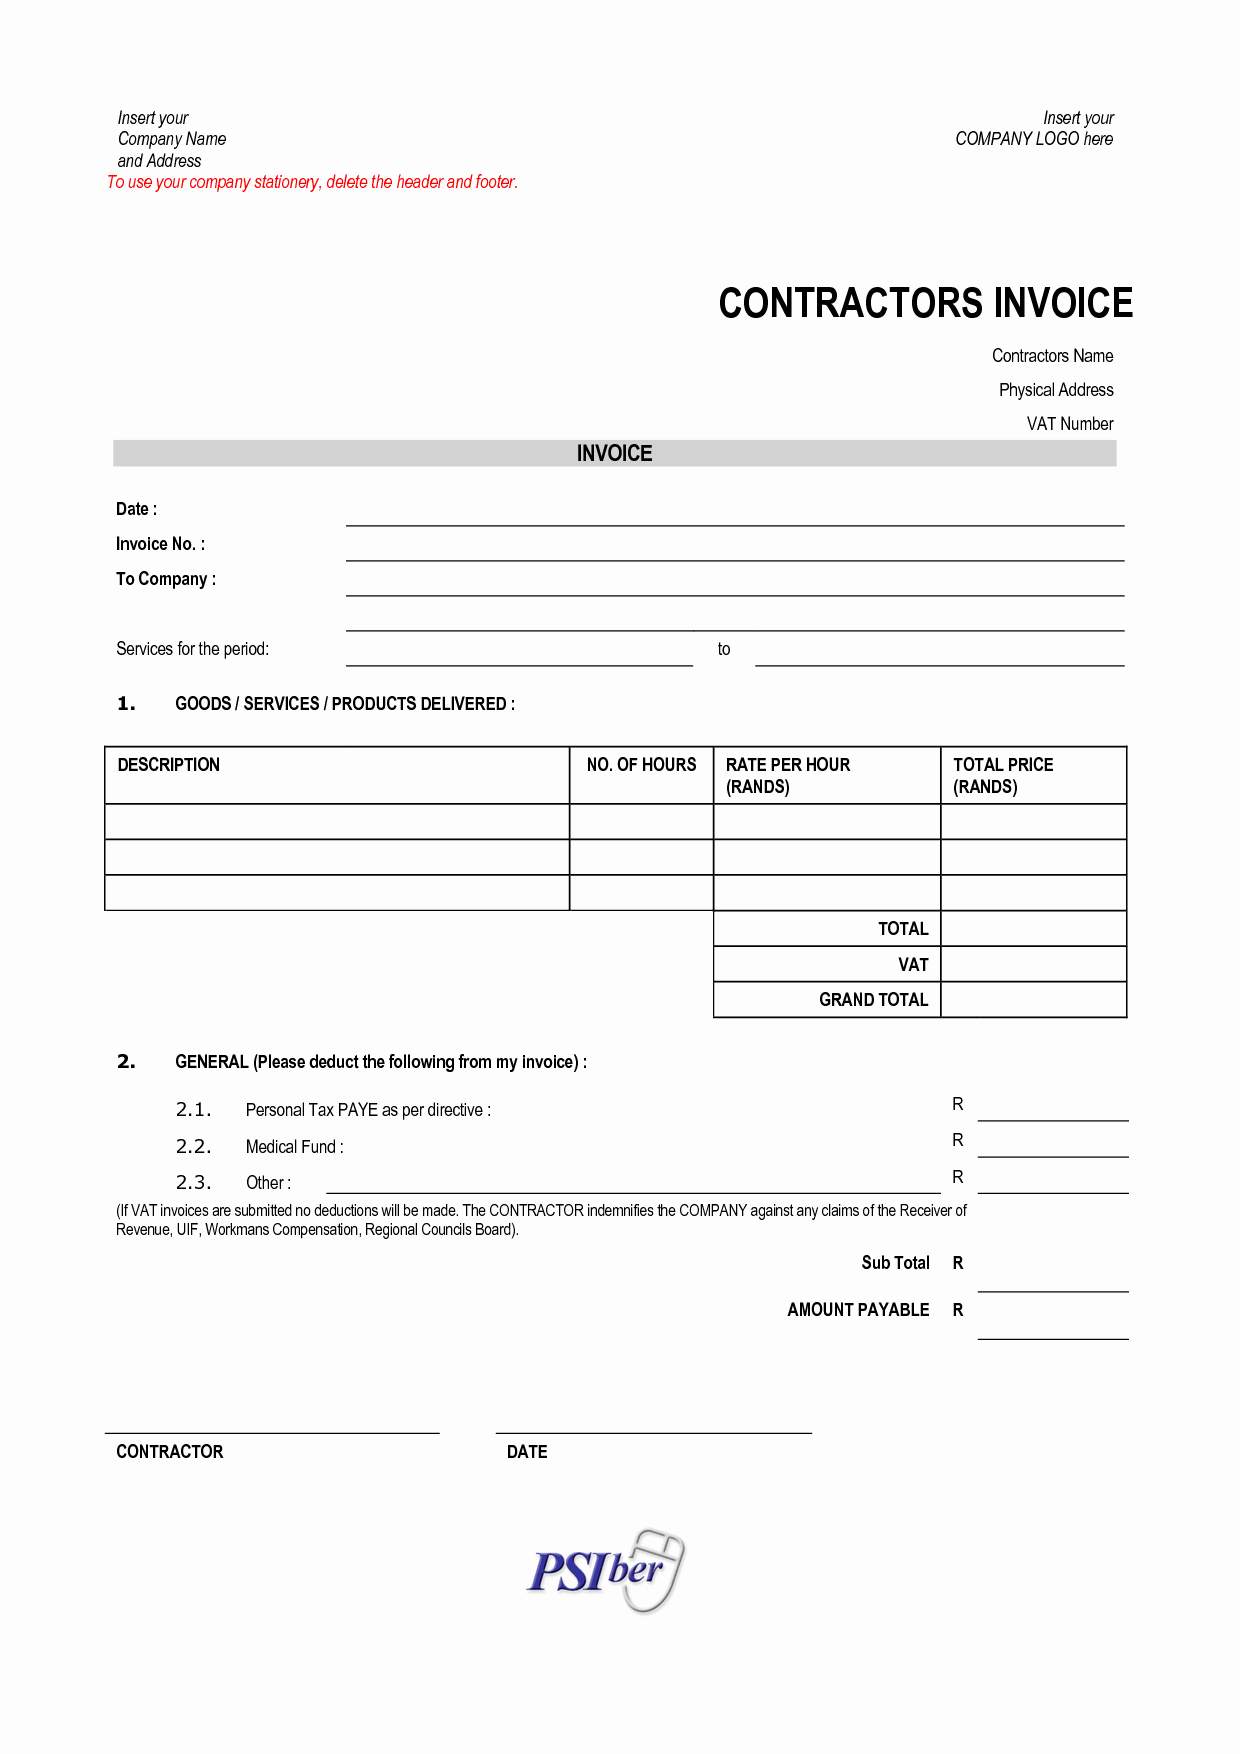 General Contractor Invoice Template Best Of Best S Of Contractor Invoice Examples Contractor